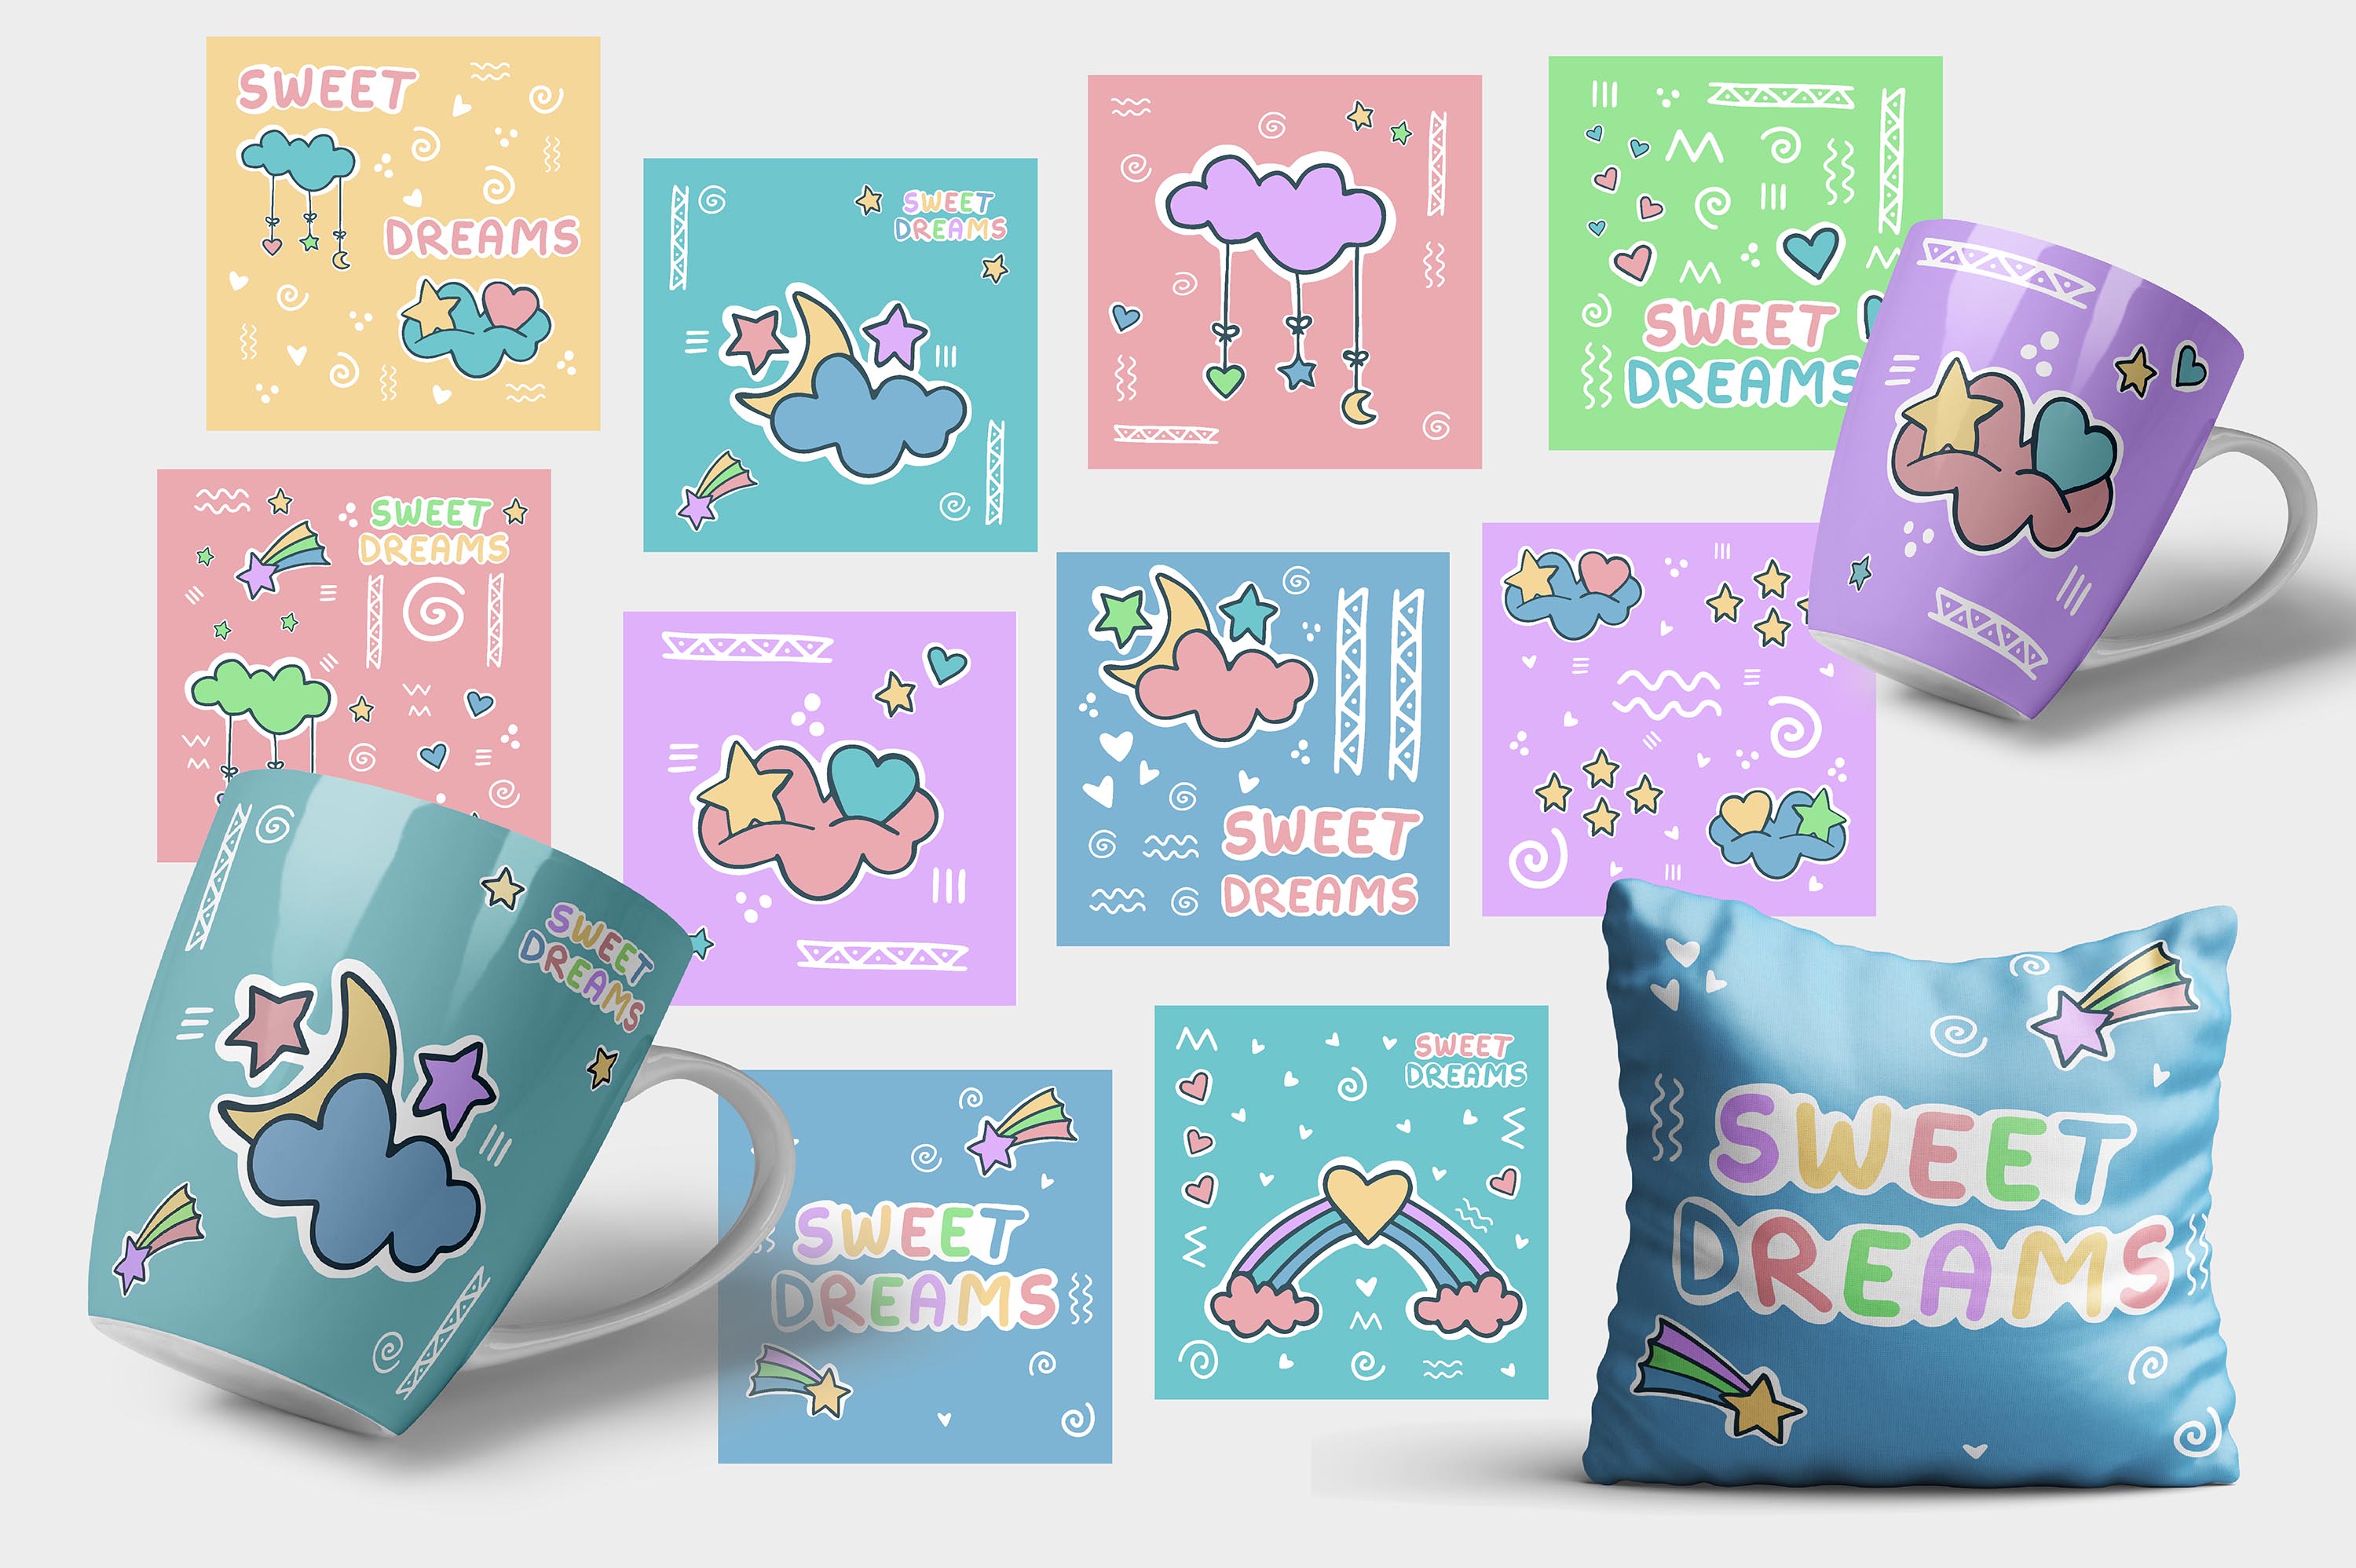 Sweet Dreams Baby Stickers and Posters facebook image.